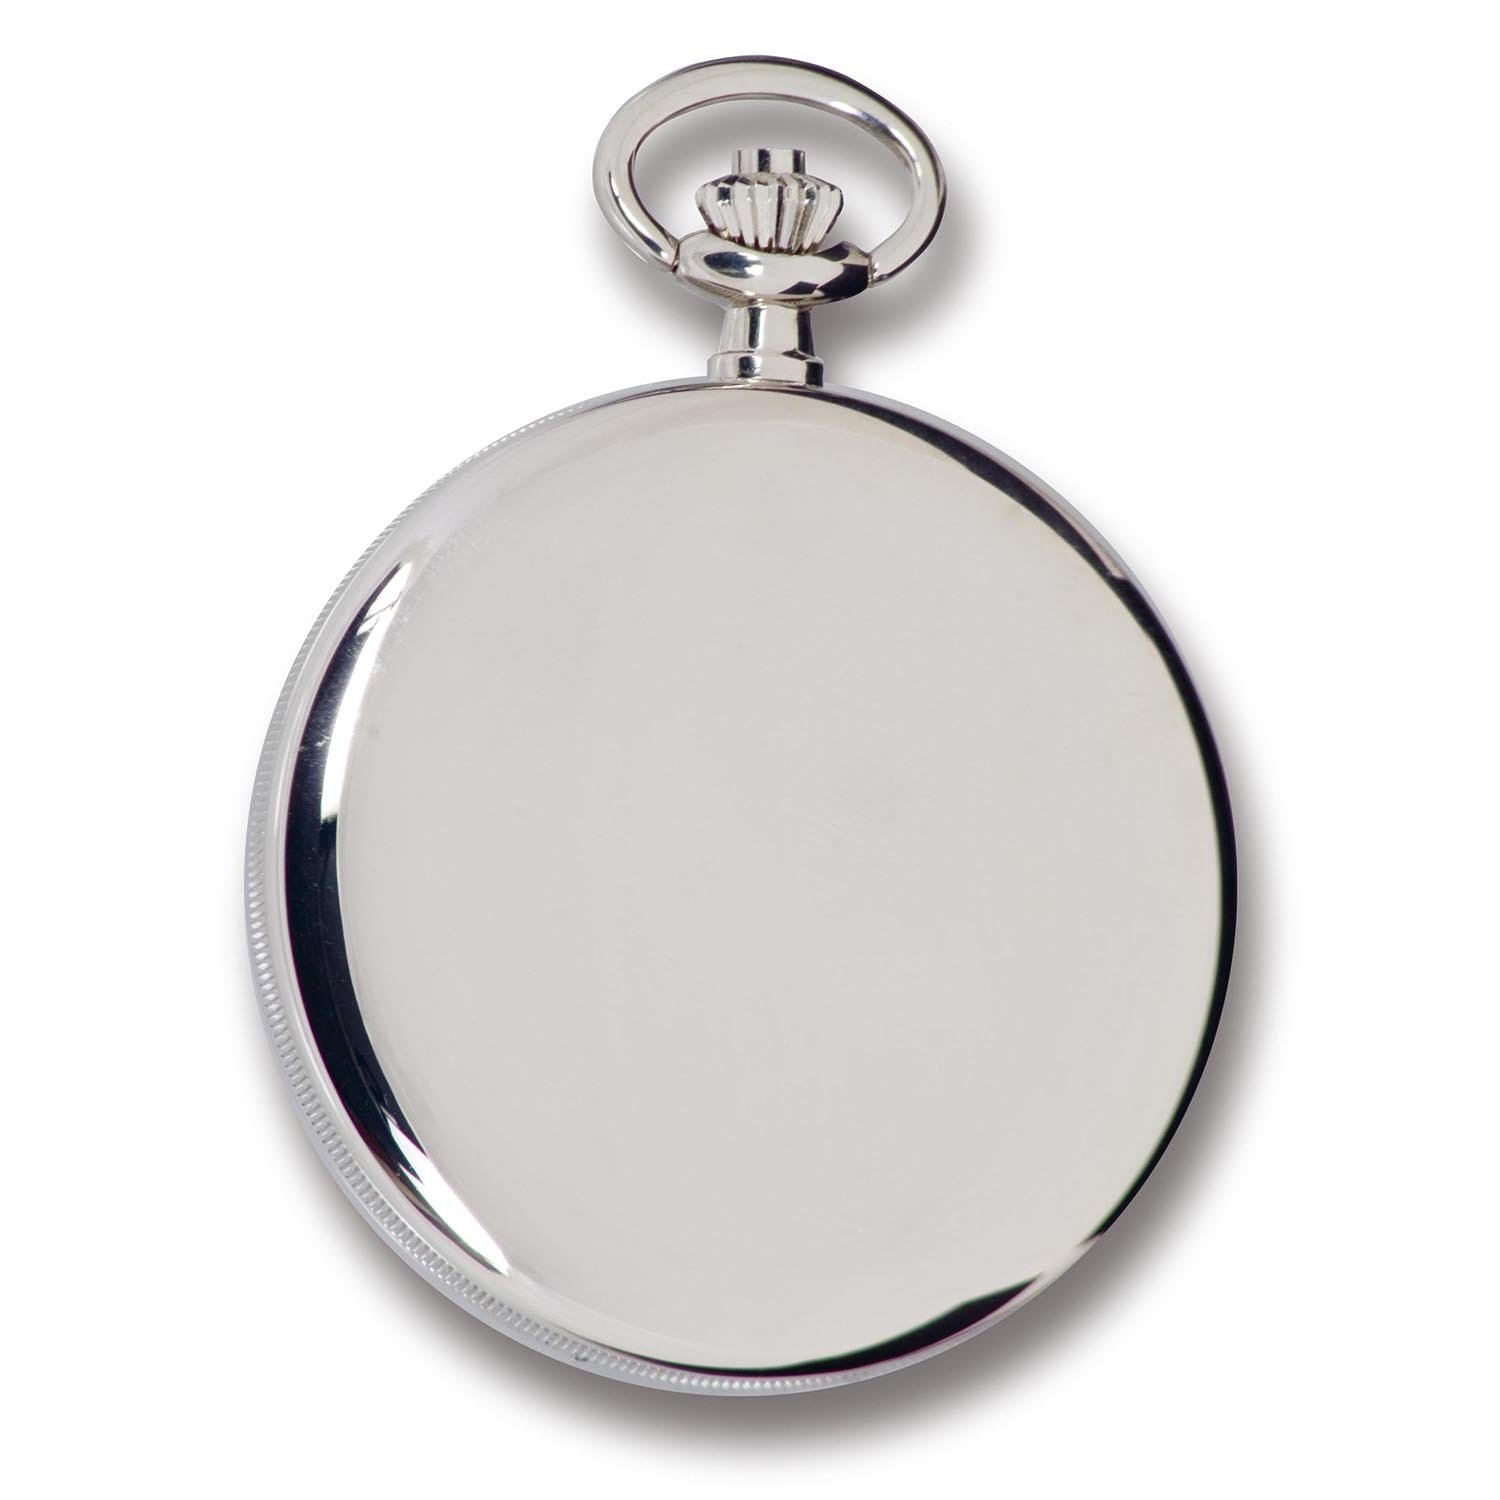 Rapport Vintage Pocket Watch with Chain Classic Oxford Hunter Case Pocket Watch with Sub-Seconds